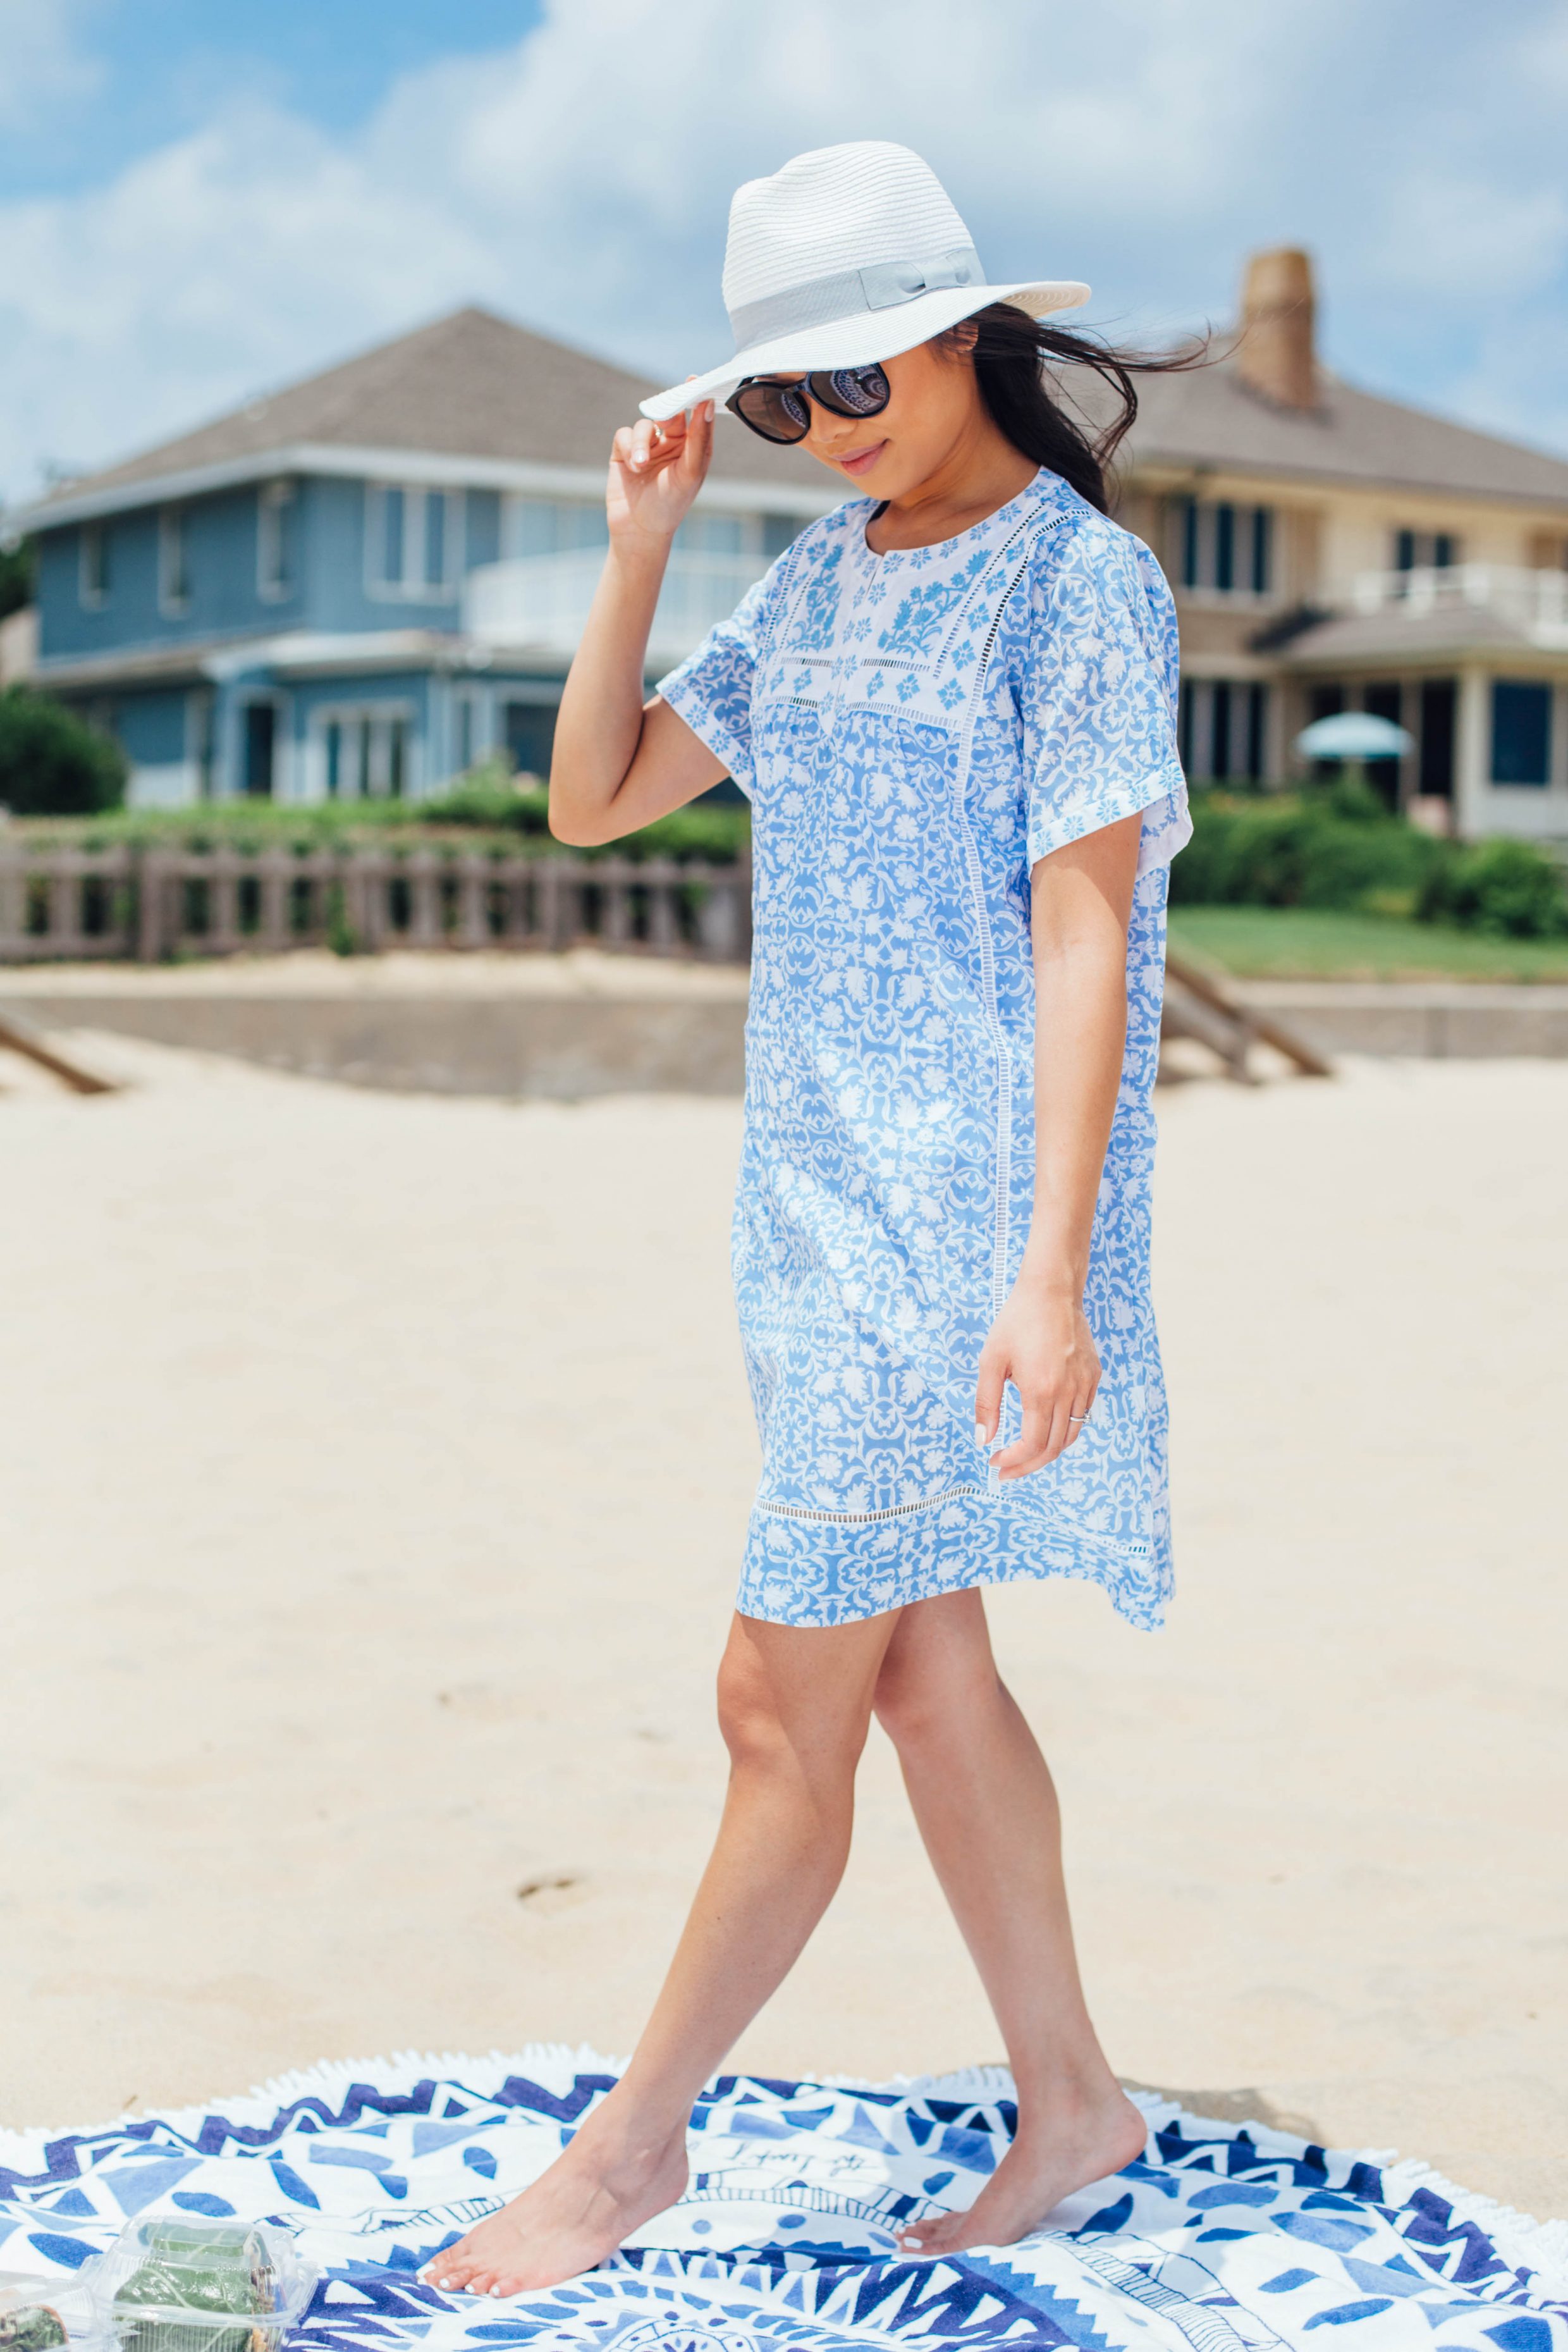 COLOR & CHIC | The perfect blue cover-up dress